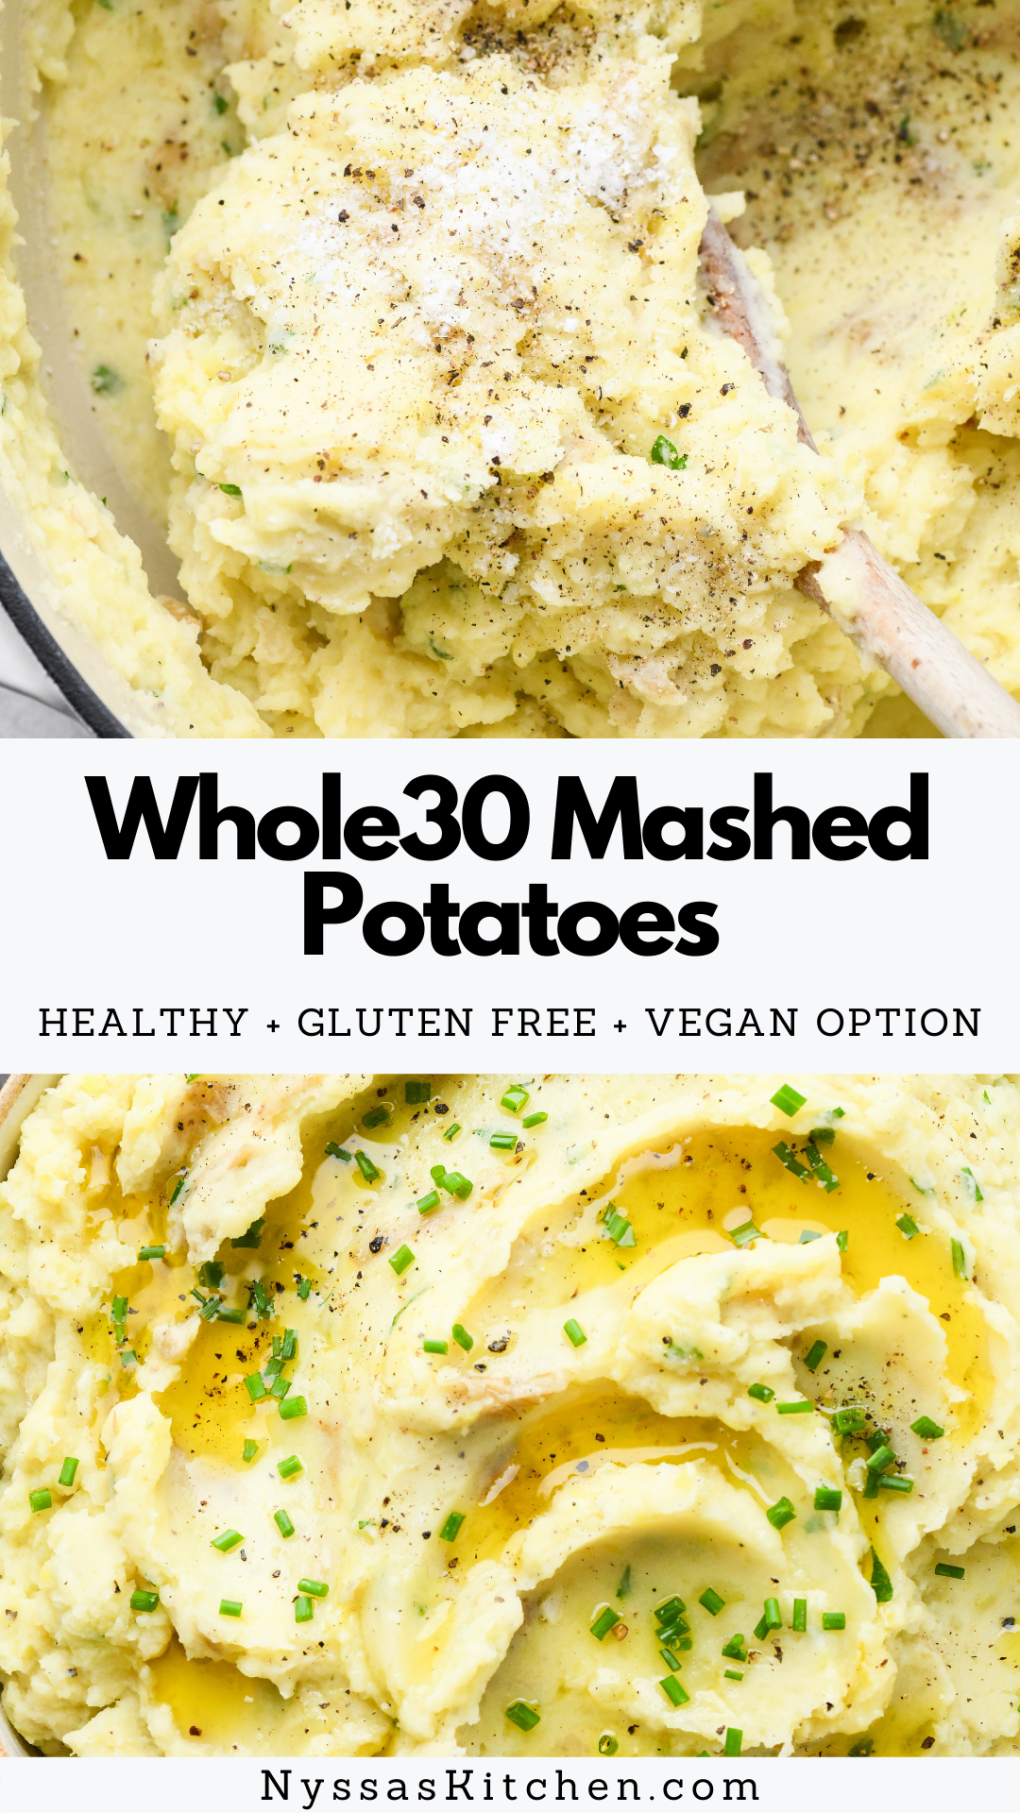 Pinterest pin for Whole30 mashed potatoes.